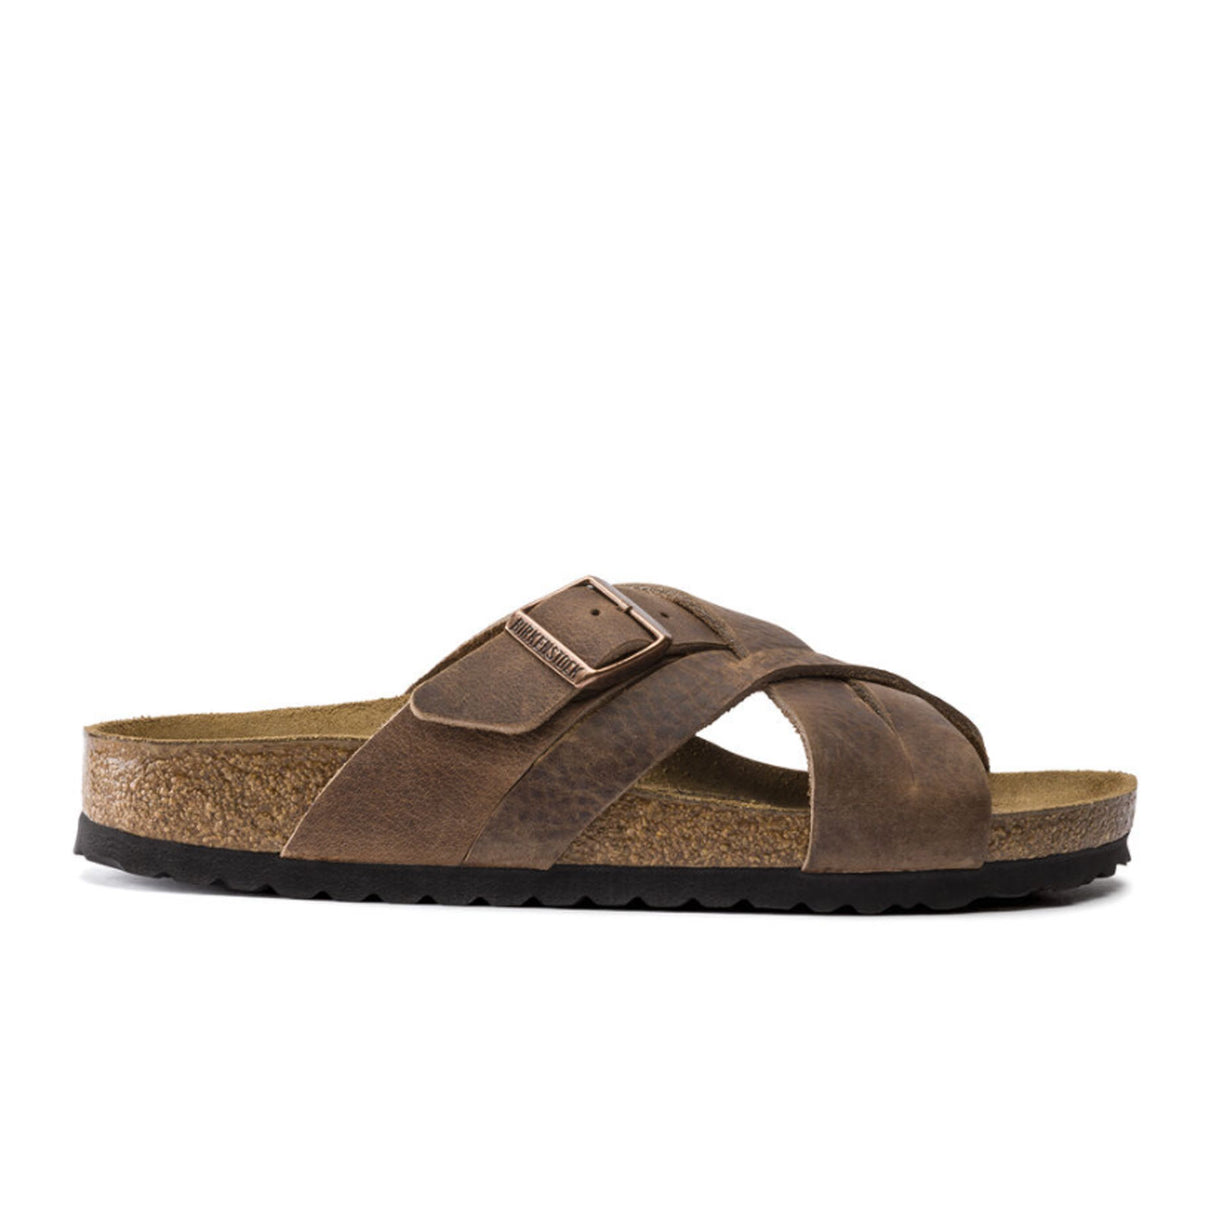 Birkenstock Lugano (Unisex) - Camberra Tobacco Oiled Leather Sandals - Slide - The Heel Shoe Fitters